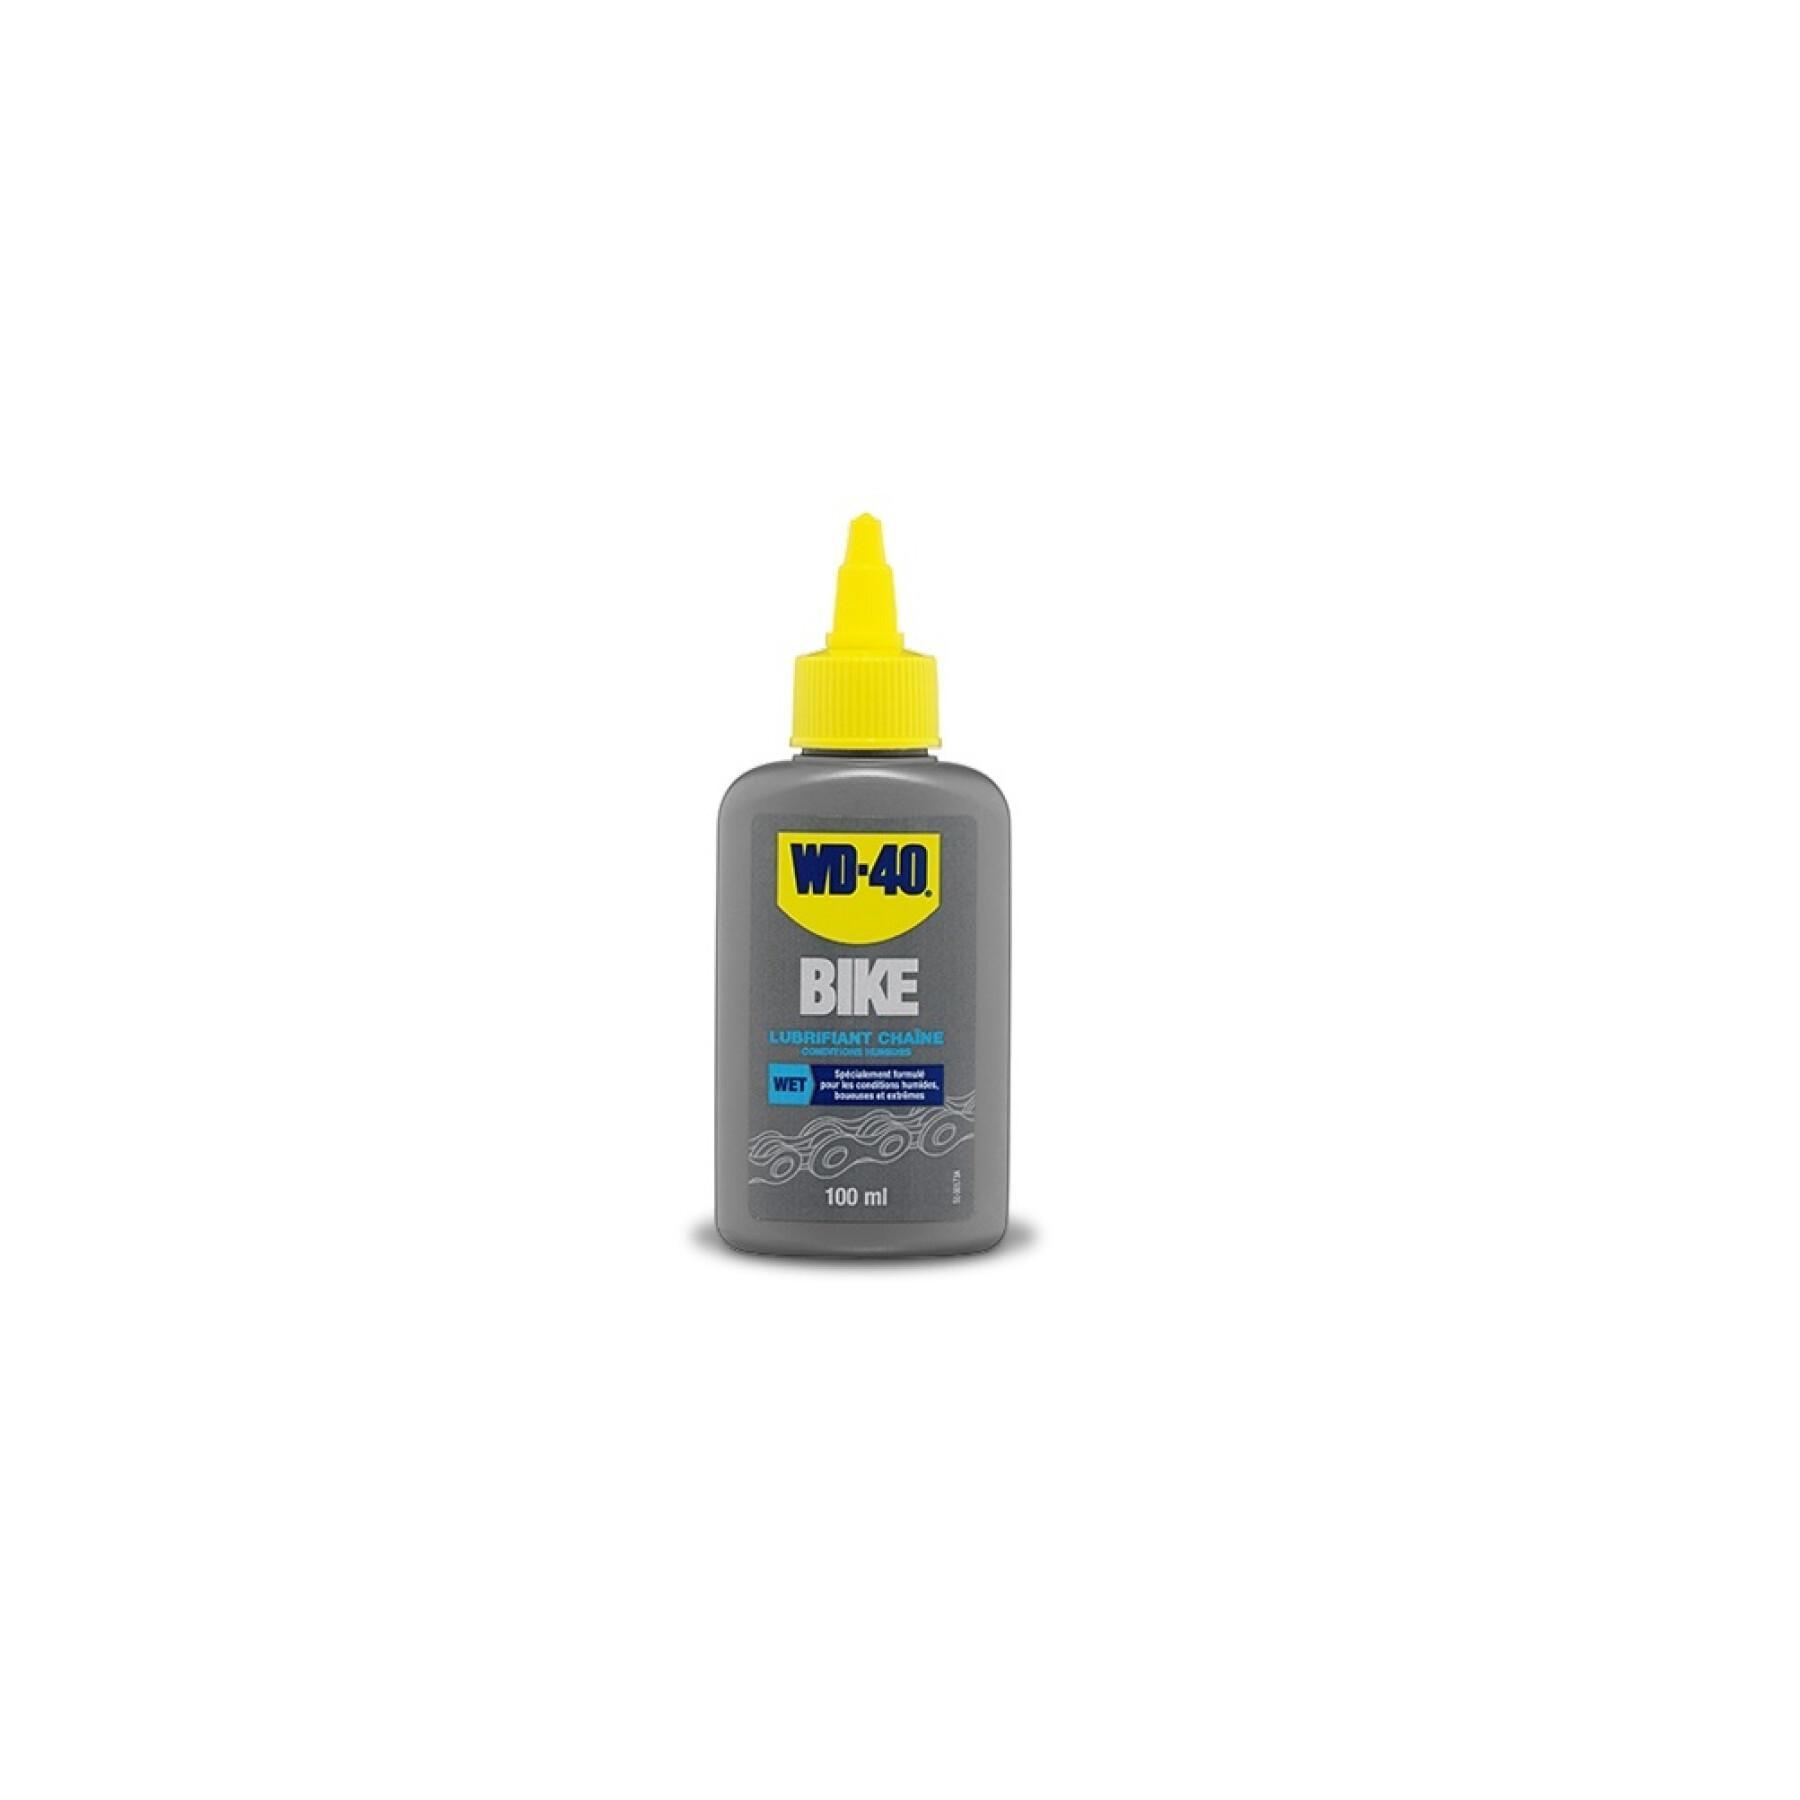 Kettenschmiermittel WD40 conditions humides 100 mL